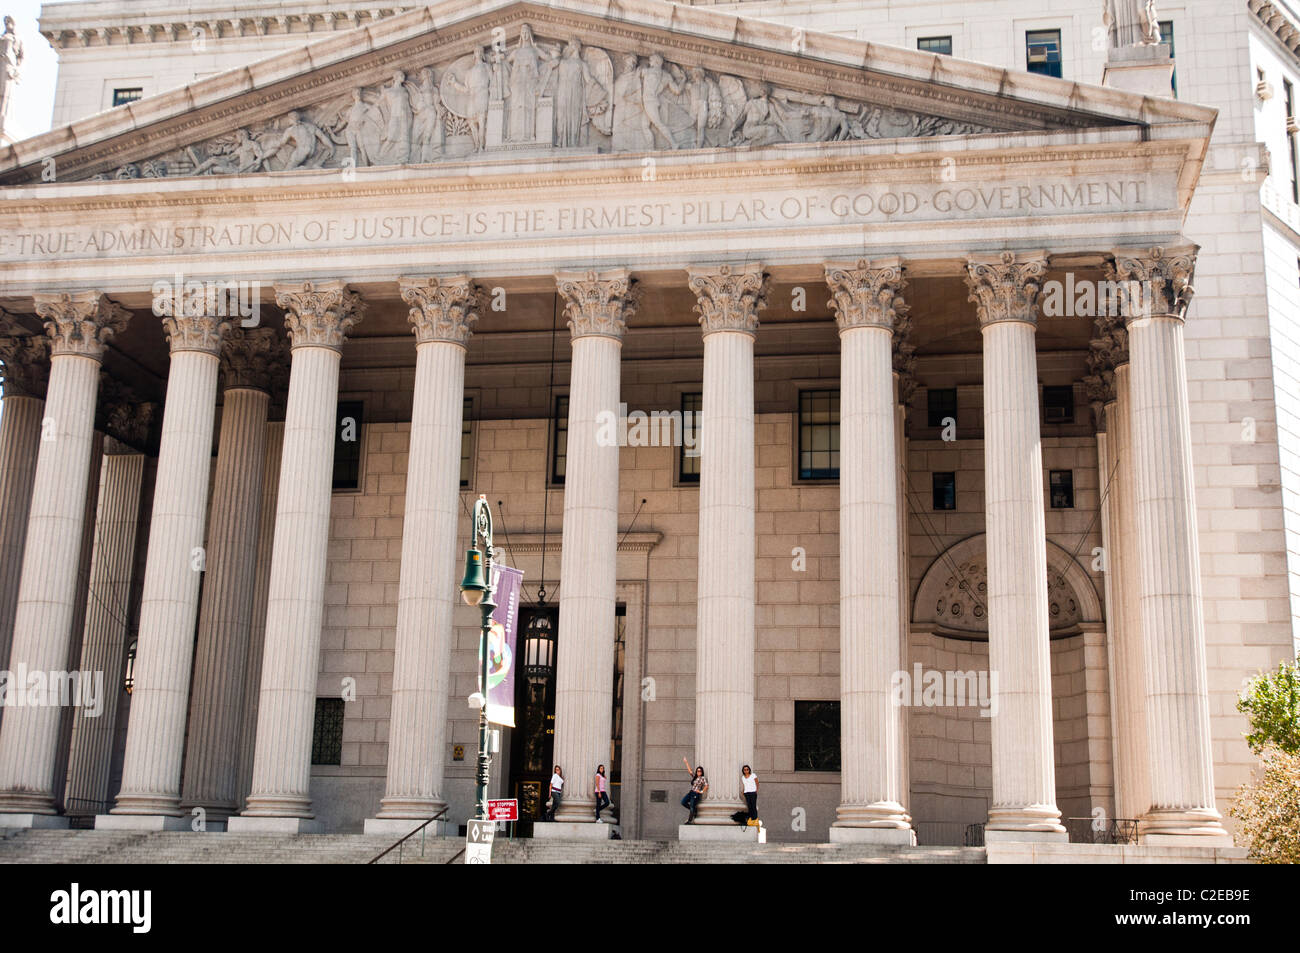 Facade of United States Court House building, Lower Manhattan, New York City, USA Stock Photo